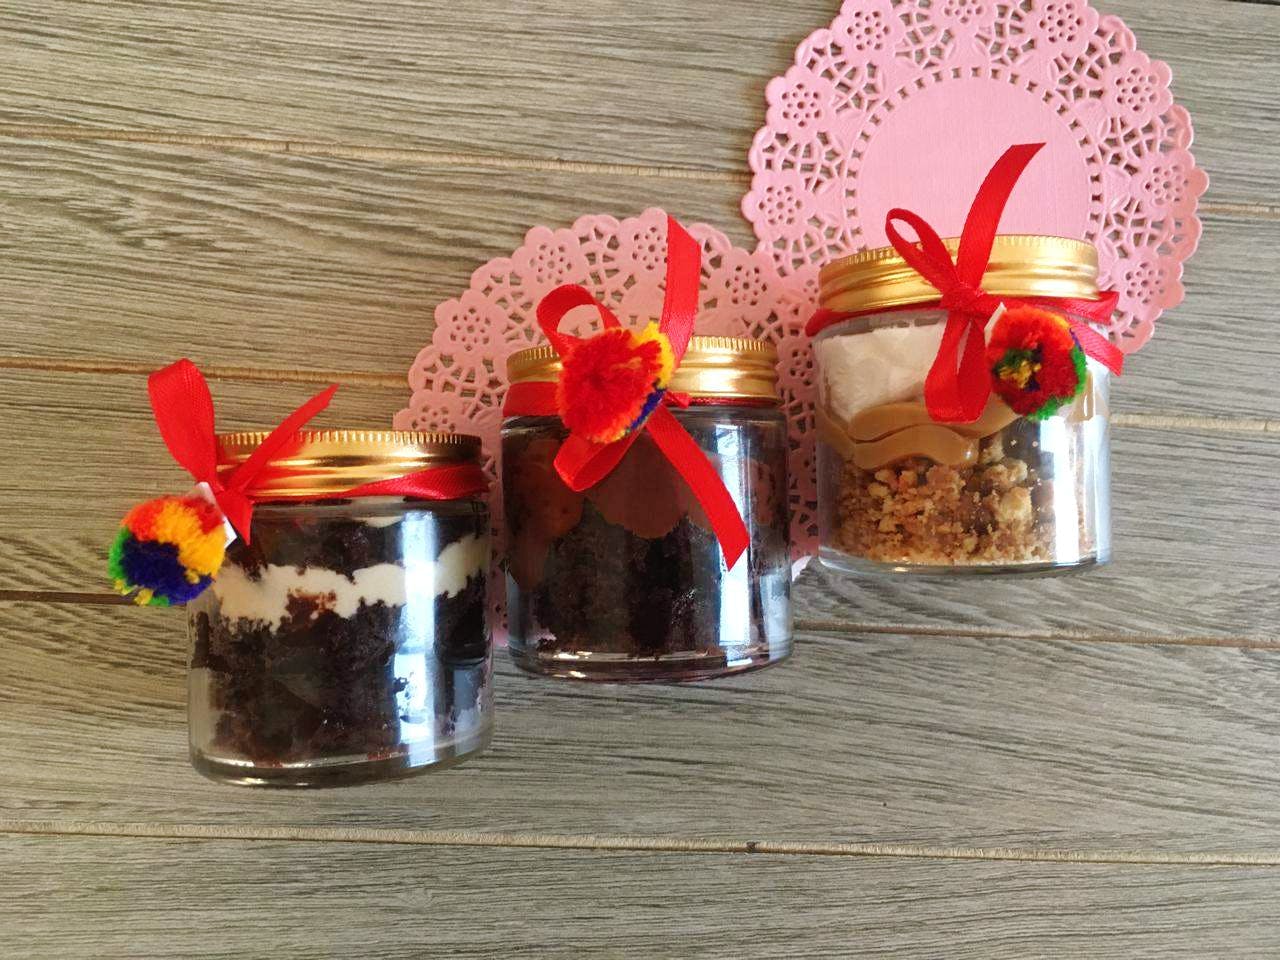 Present,Party favor,Mason jar,Wedding favors,Mishloach manot,Ritual,Potpourri,Food,Home accessories,Party supply